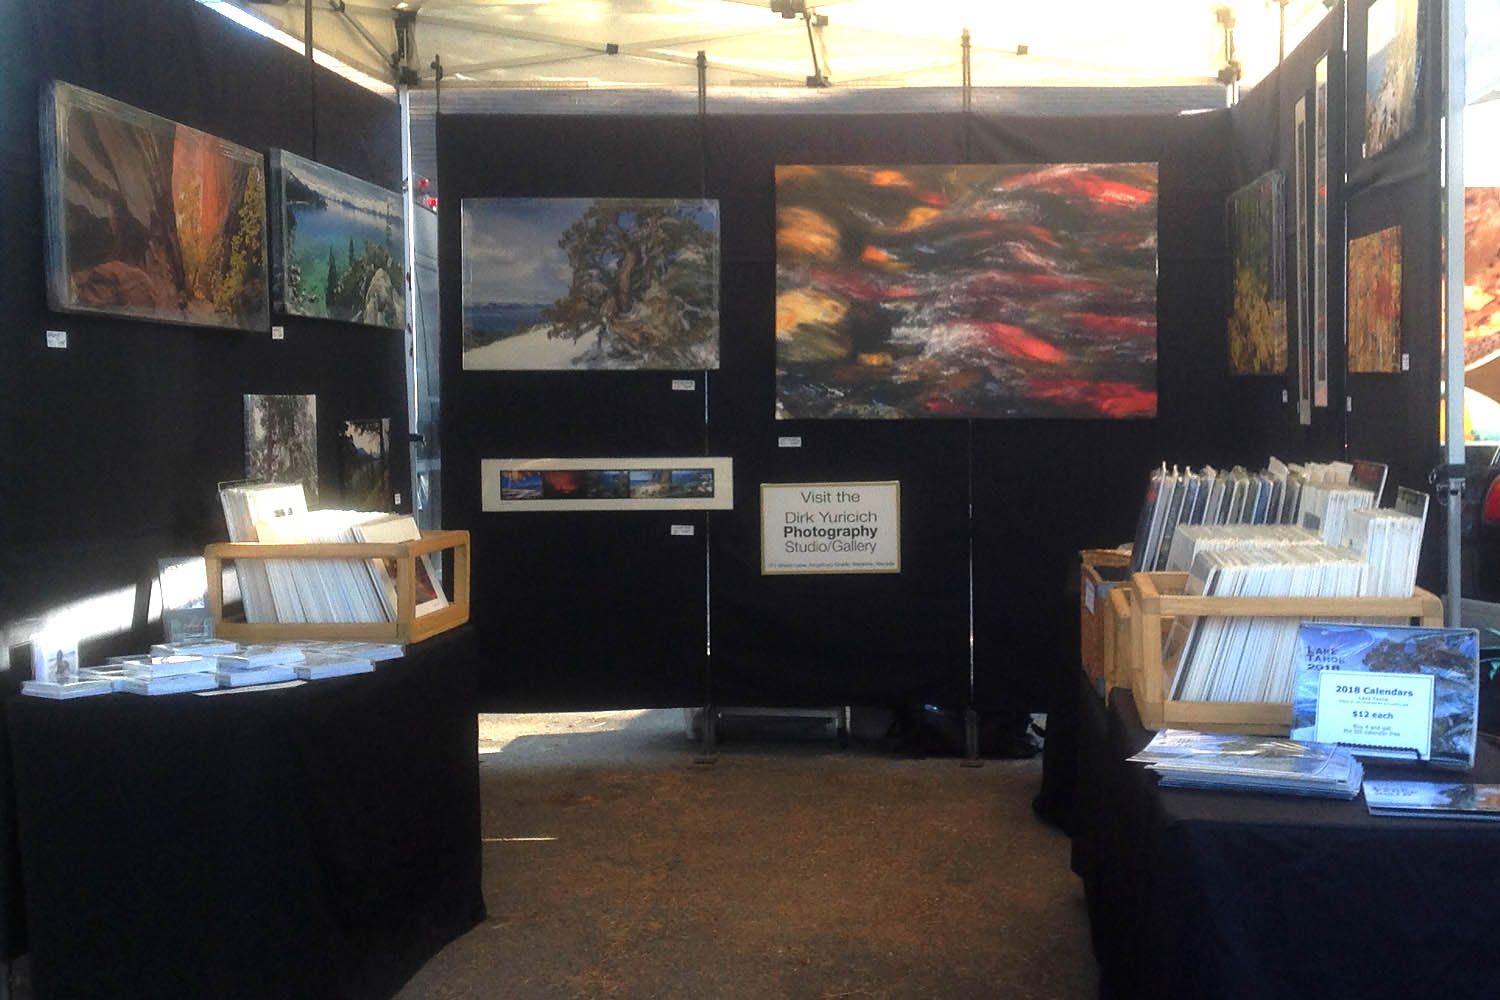 Photography by Dirk Yuricich at his booth at the South Lake Tahoe Farmers Market